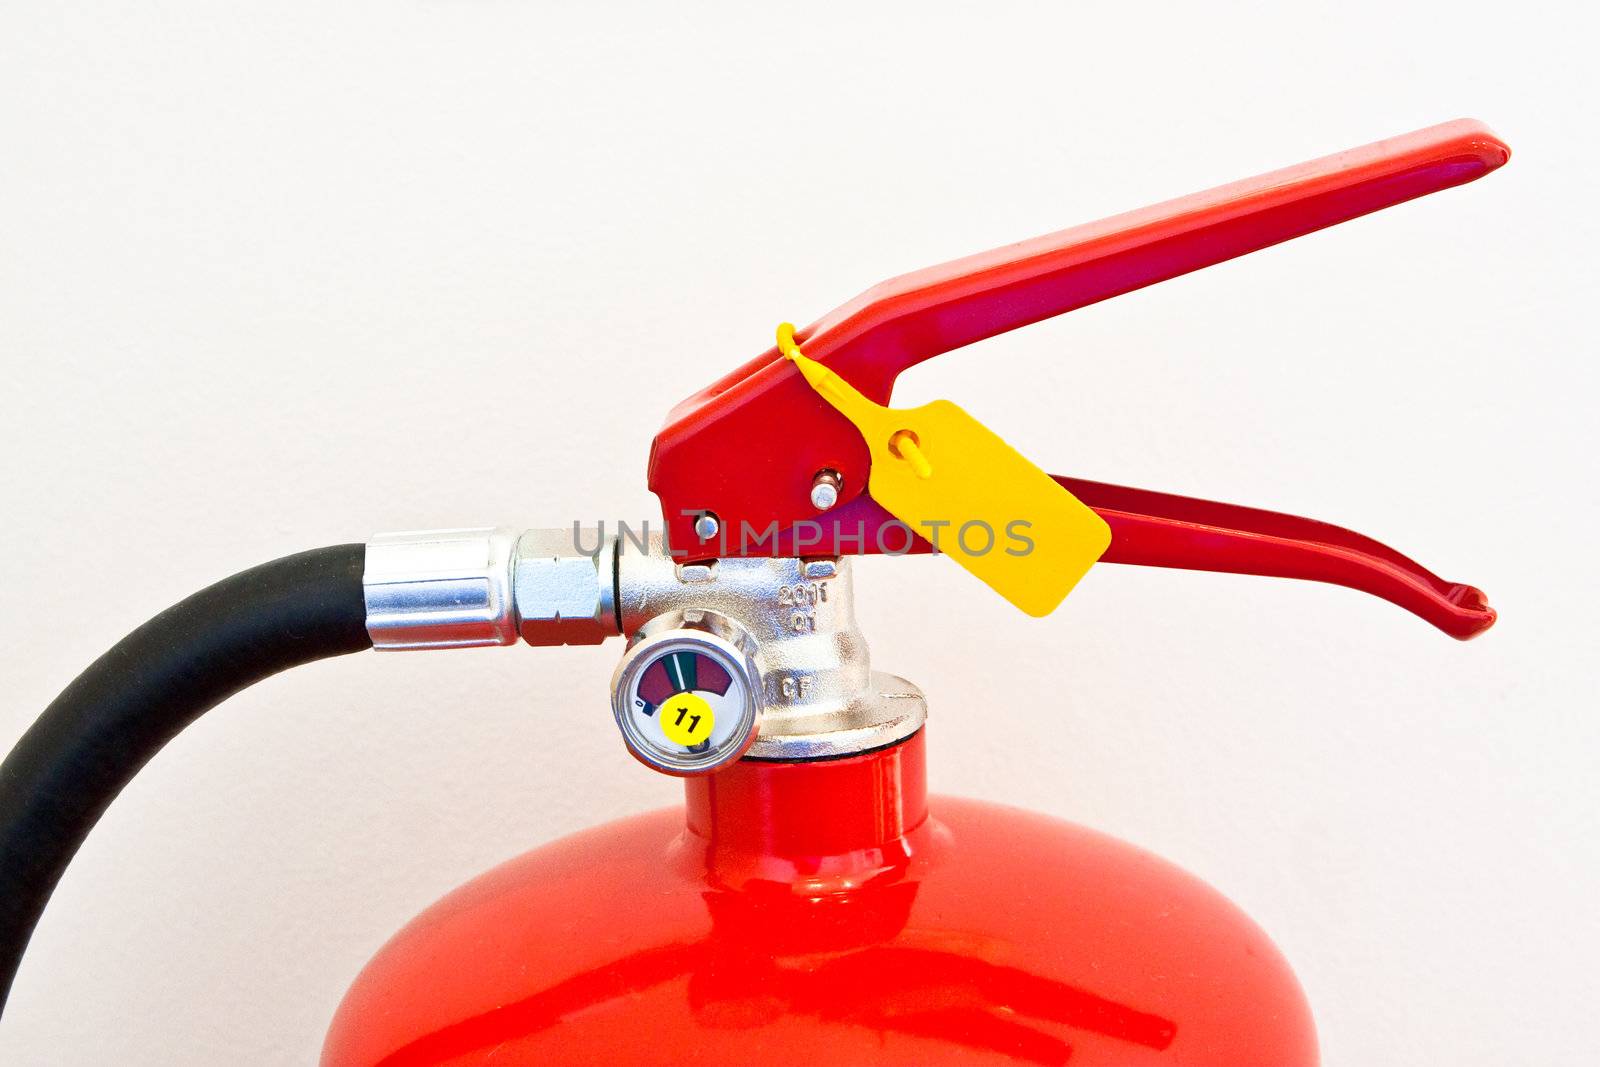 The top of a red fire extinguisher against a cream colored wall